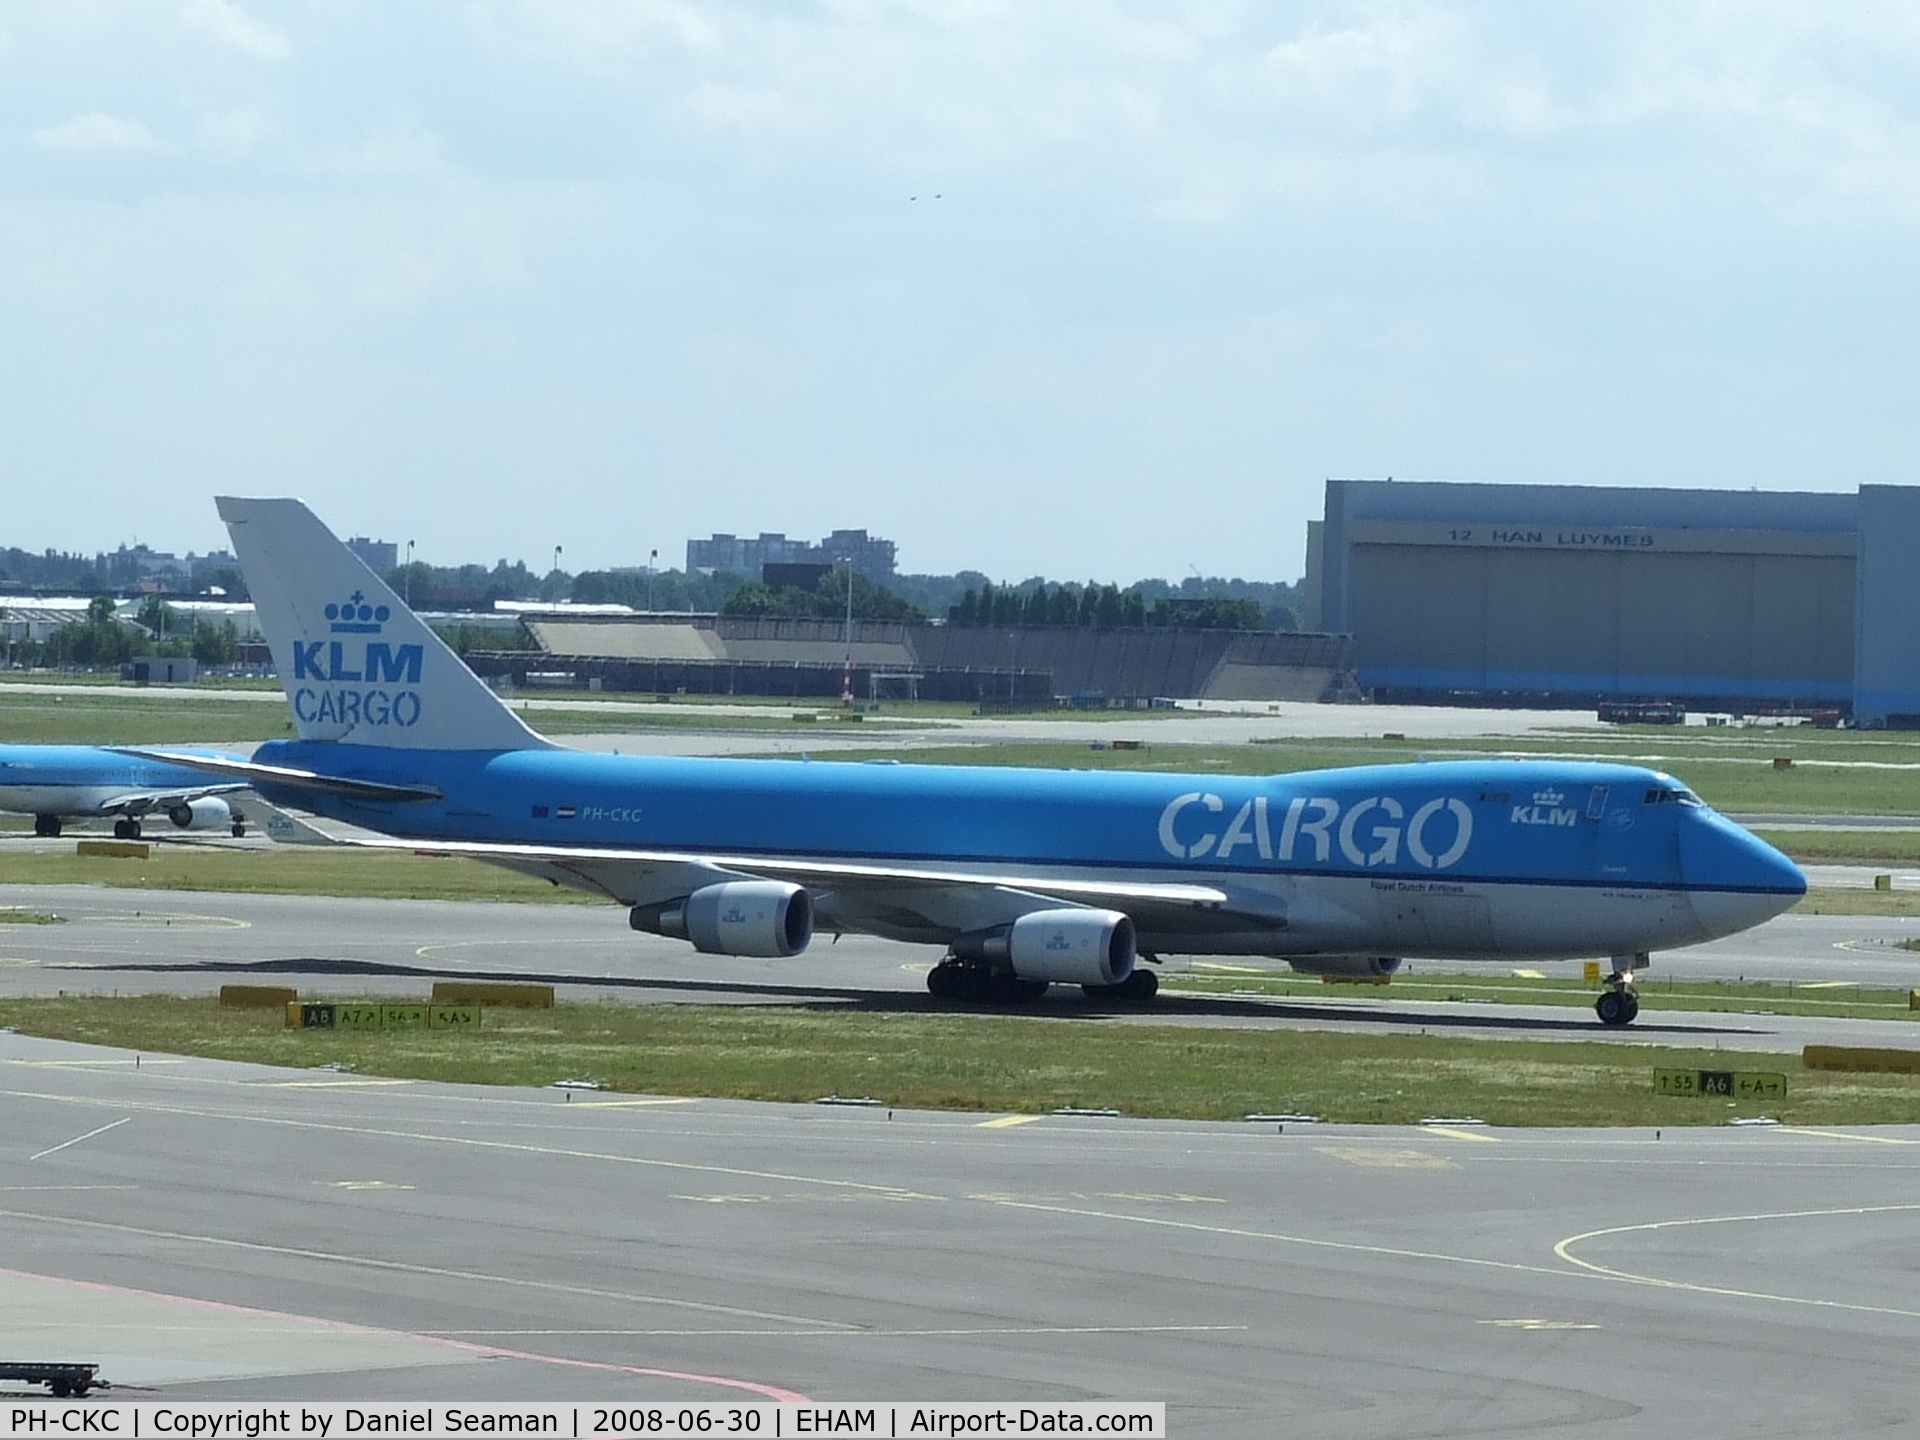 PH-CKC, 2004 Boeing 747-406F/ER/SCD C/N 33696, one of meny cargo today.